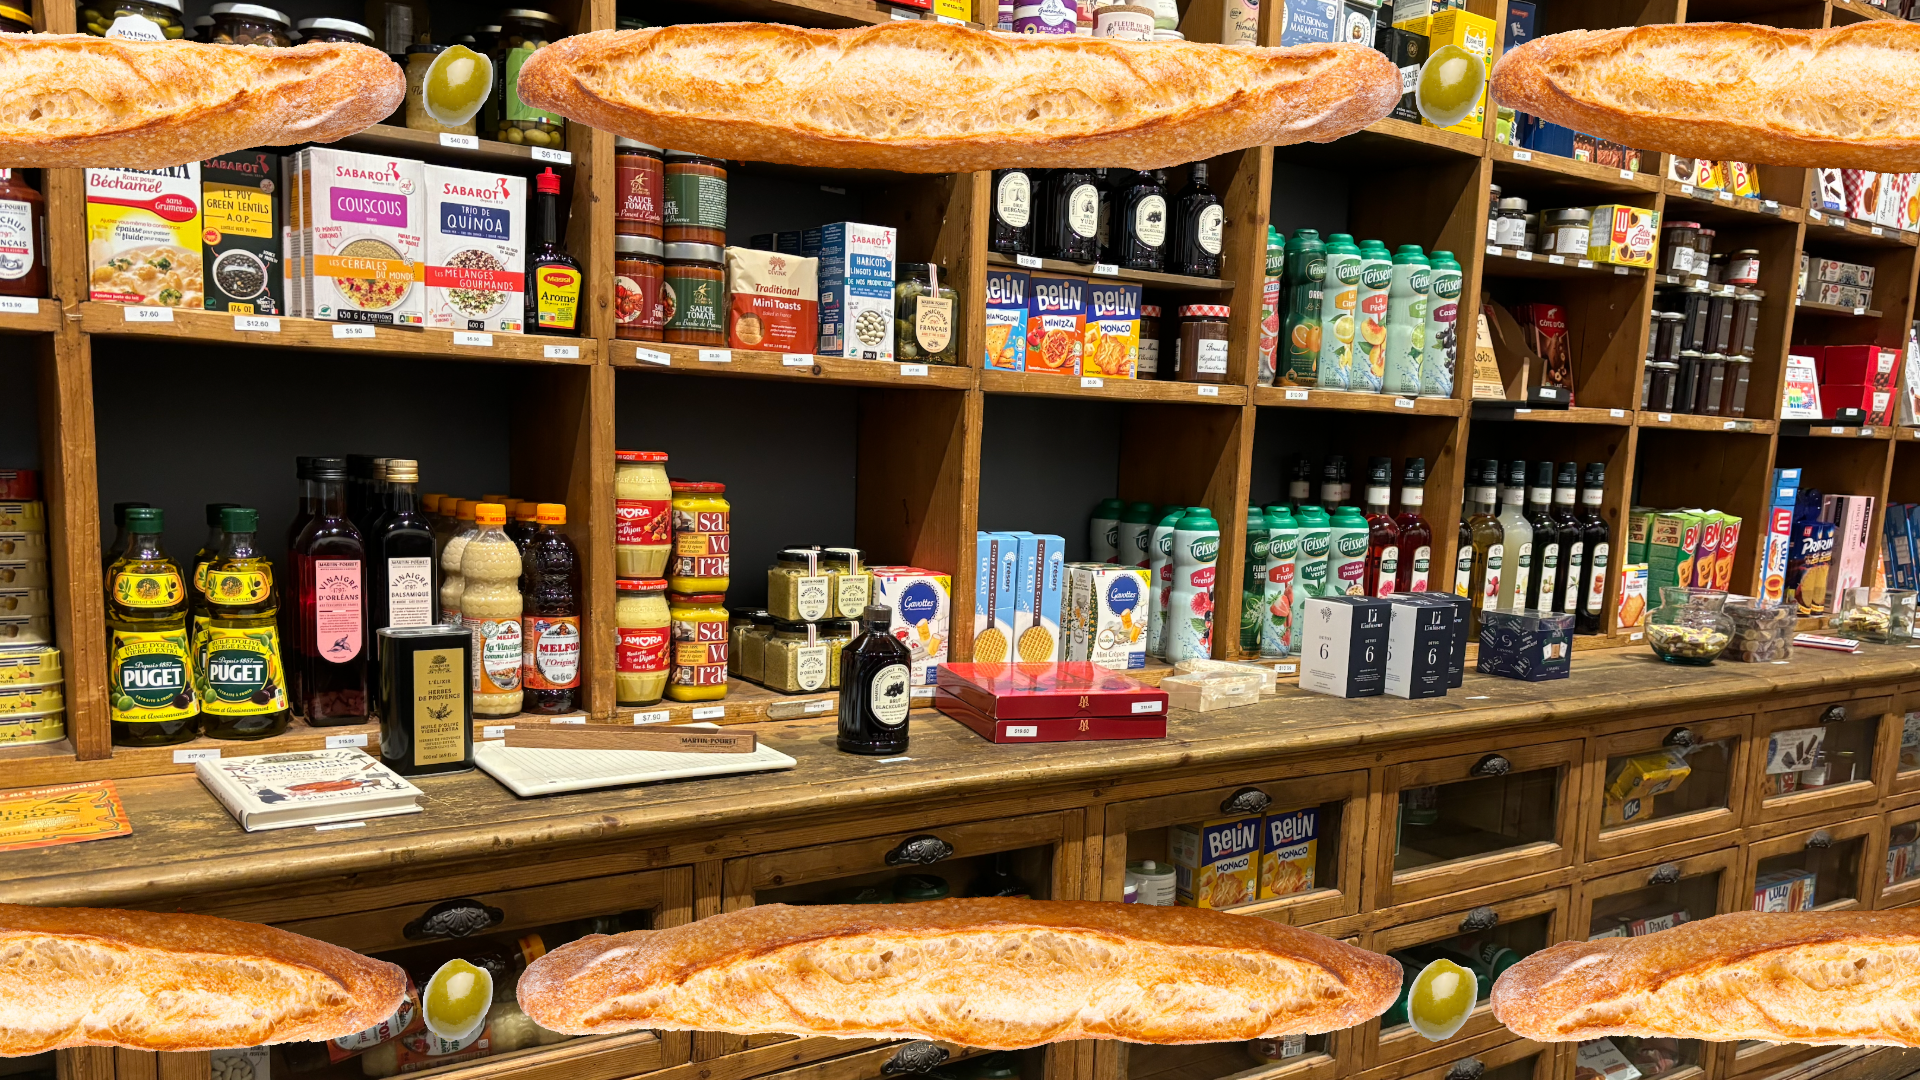 shelves stocked with french pantry items with photoshopped baguettes overlaid